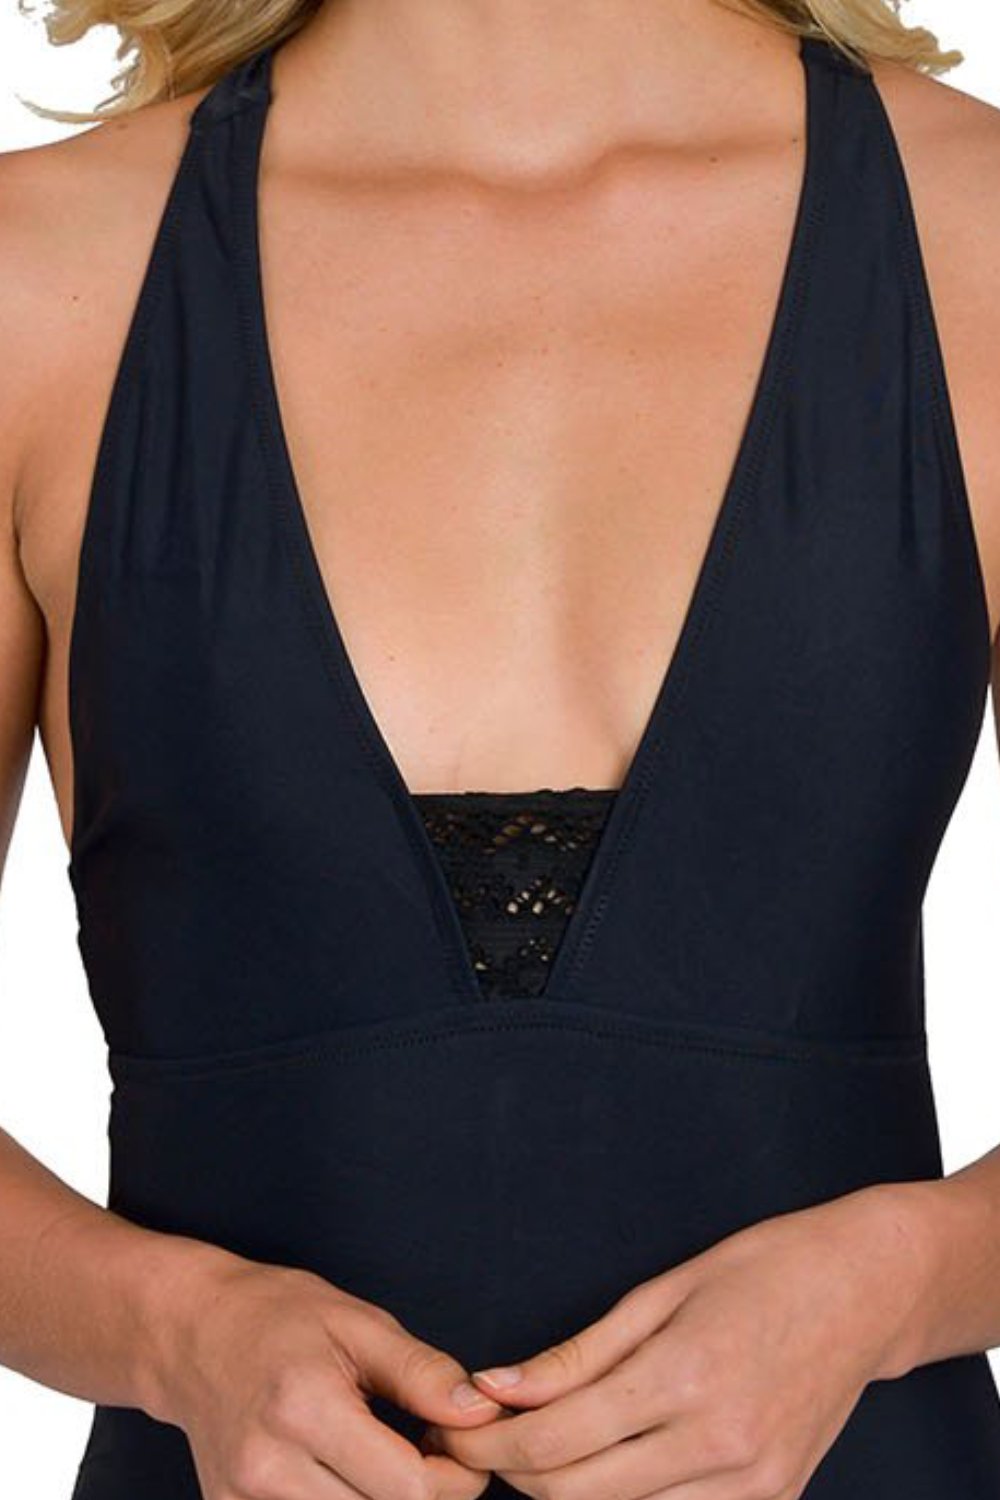 One Piece Bathing Suit Detail